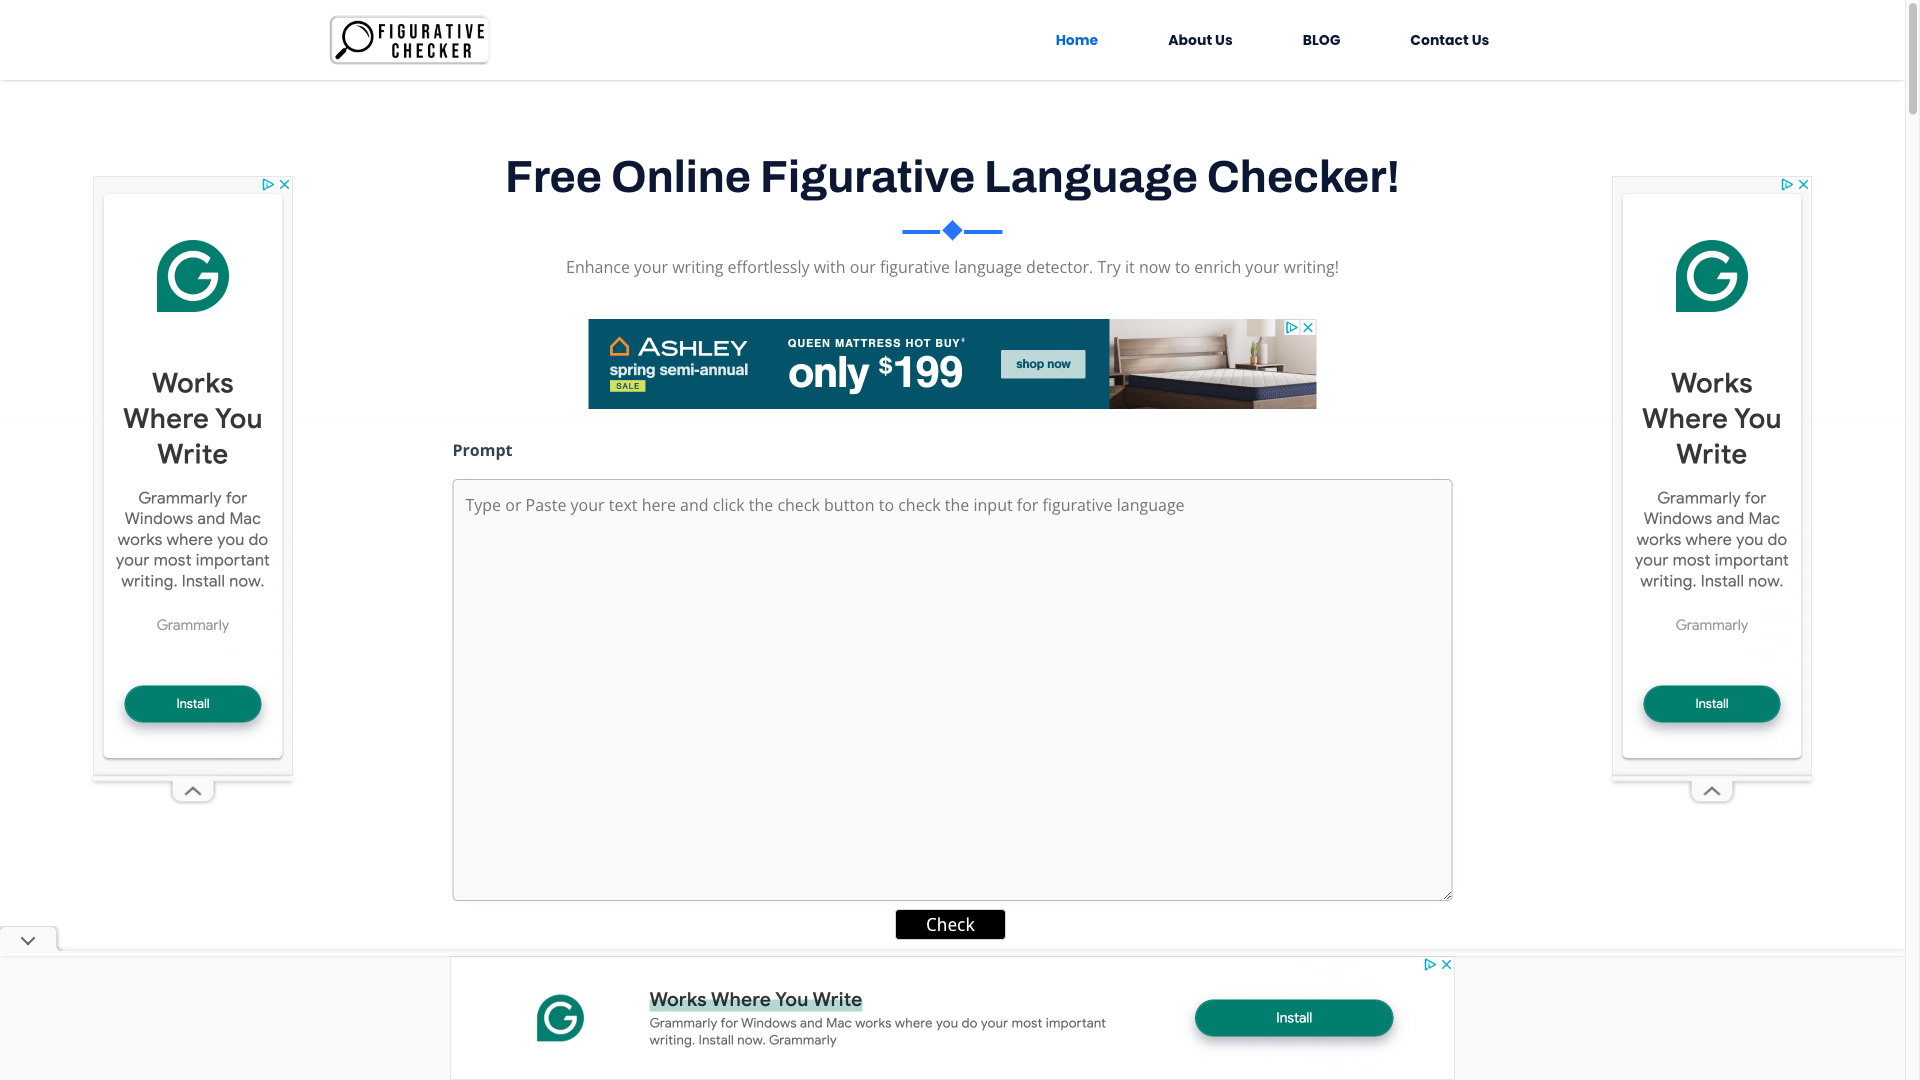 Display image for Figurativechecker